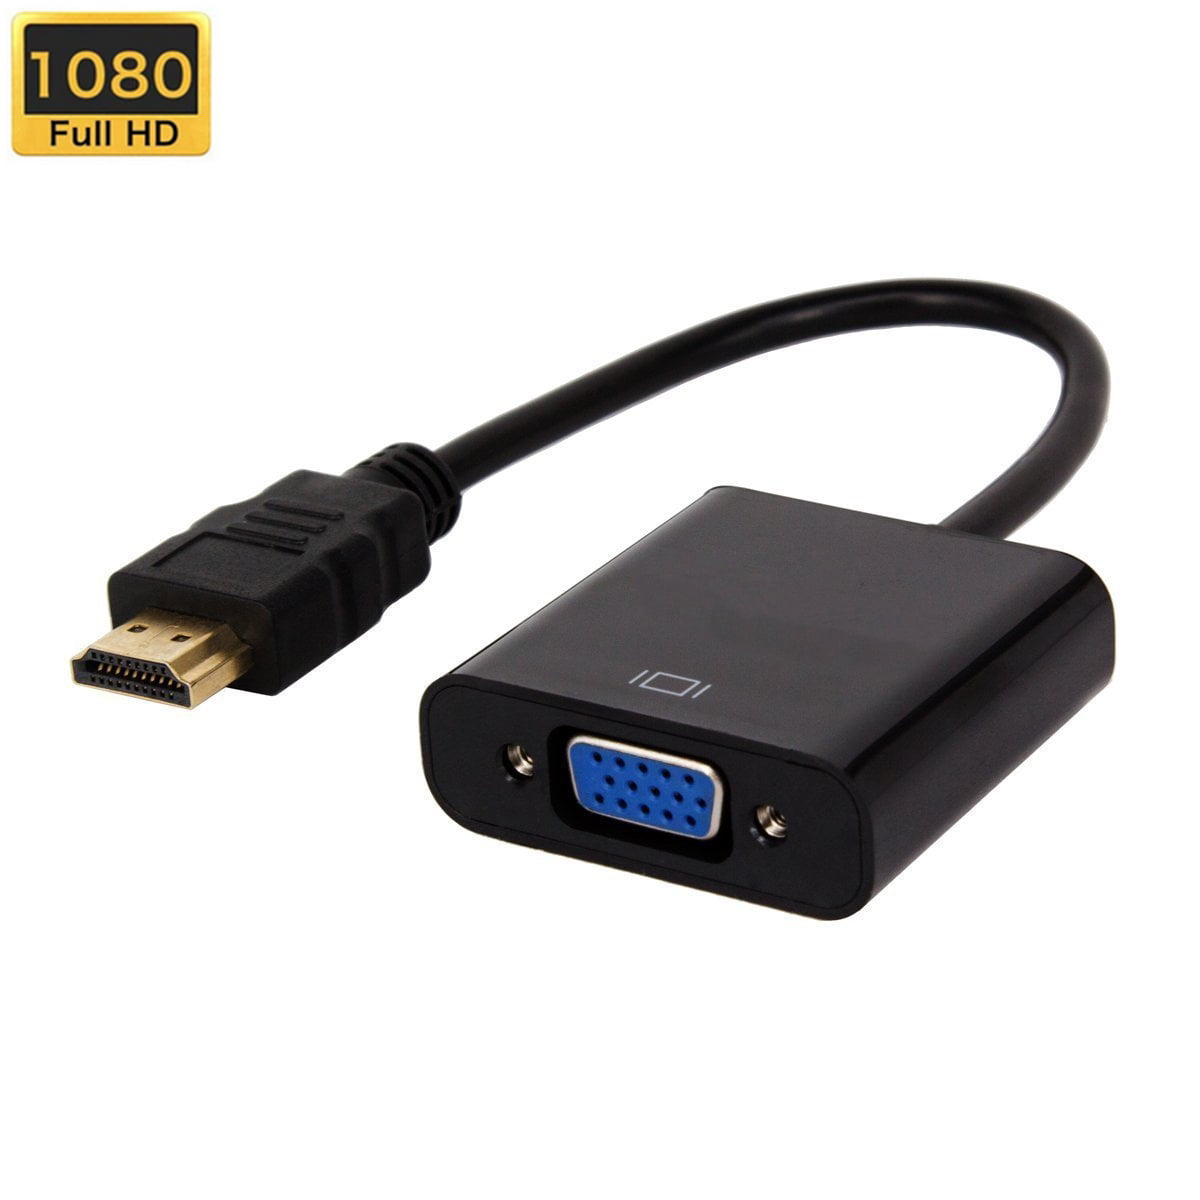 Male to Male Desktop NOT Bidirectional, 1.8M 1080P HD Video Cord Compatible for Computer HDMI to VGA Adapter HDMI to VGA Cable 6 Feet HDTV and More Monitor Laptop Projector PC 